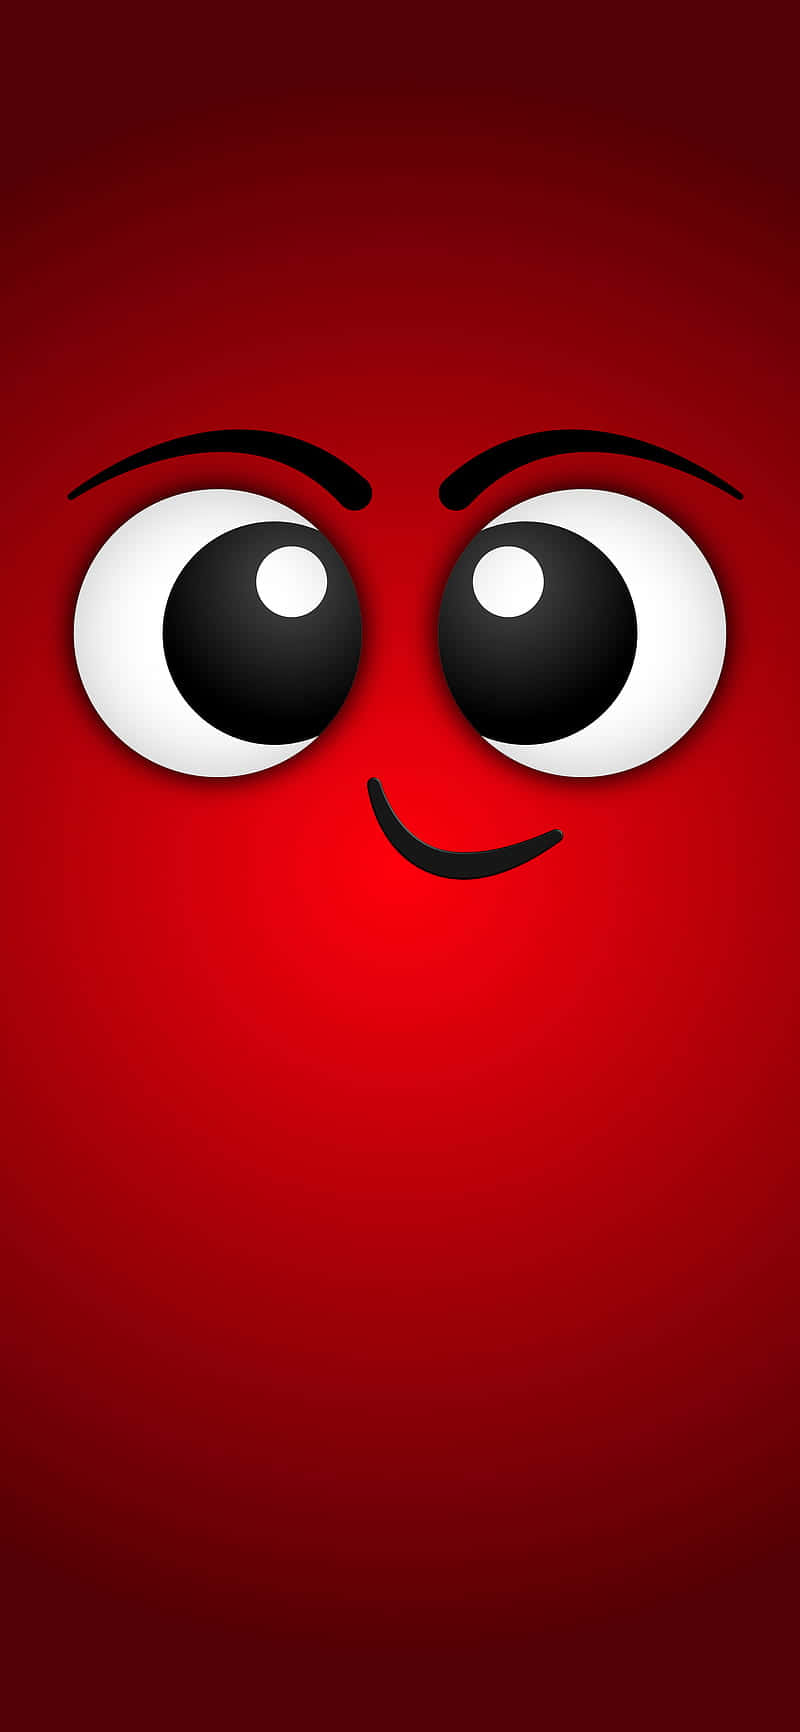 A Red Face With Black Eyes Wallpaper